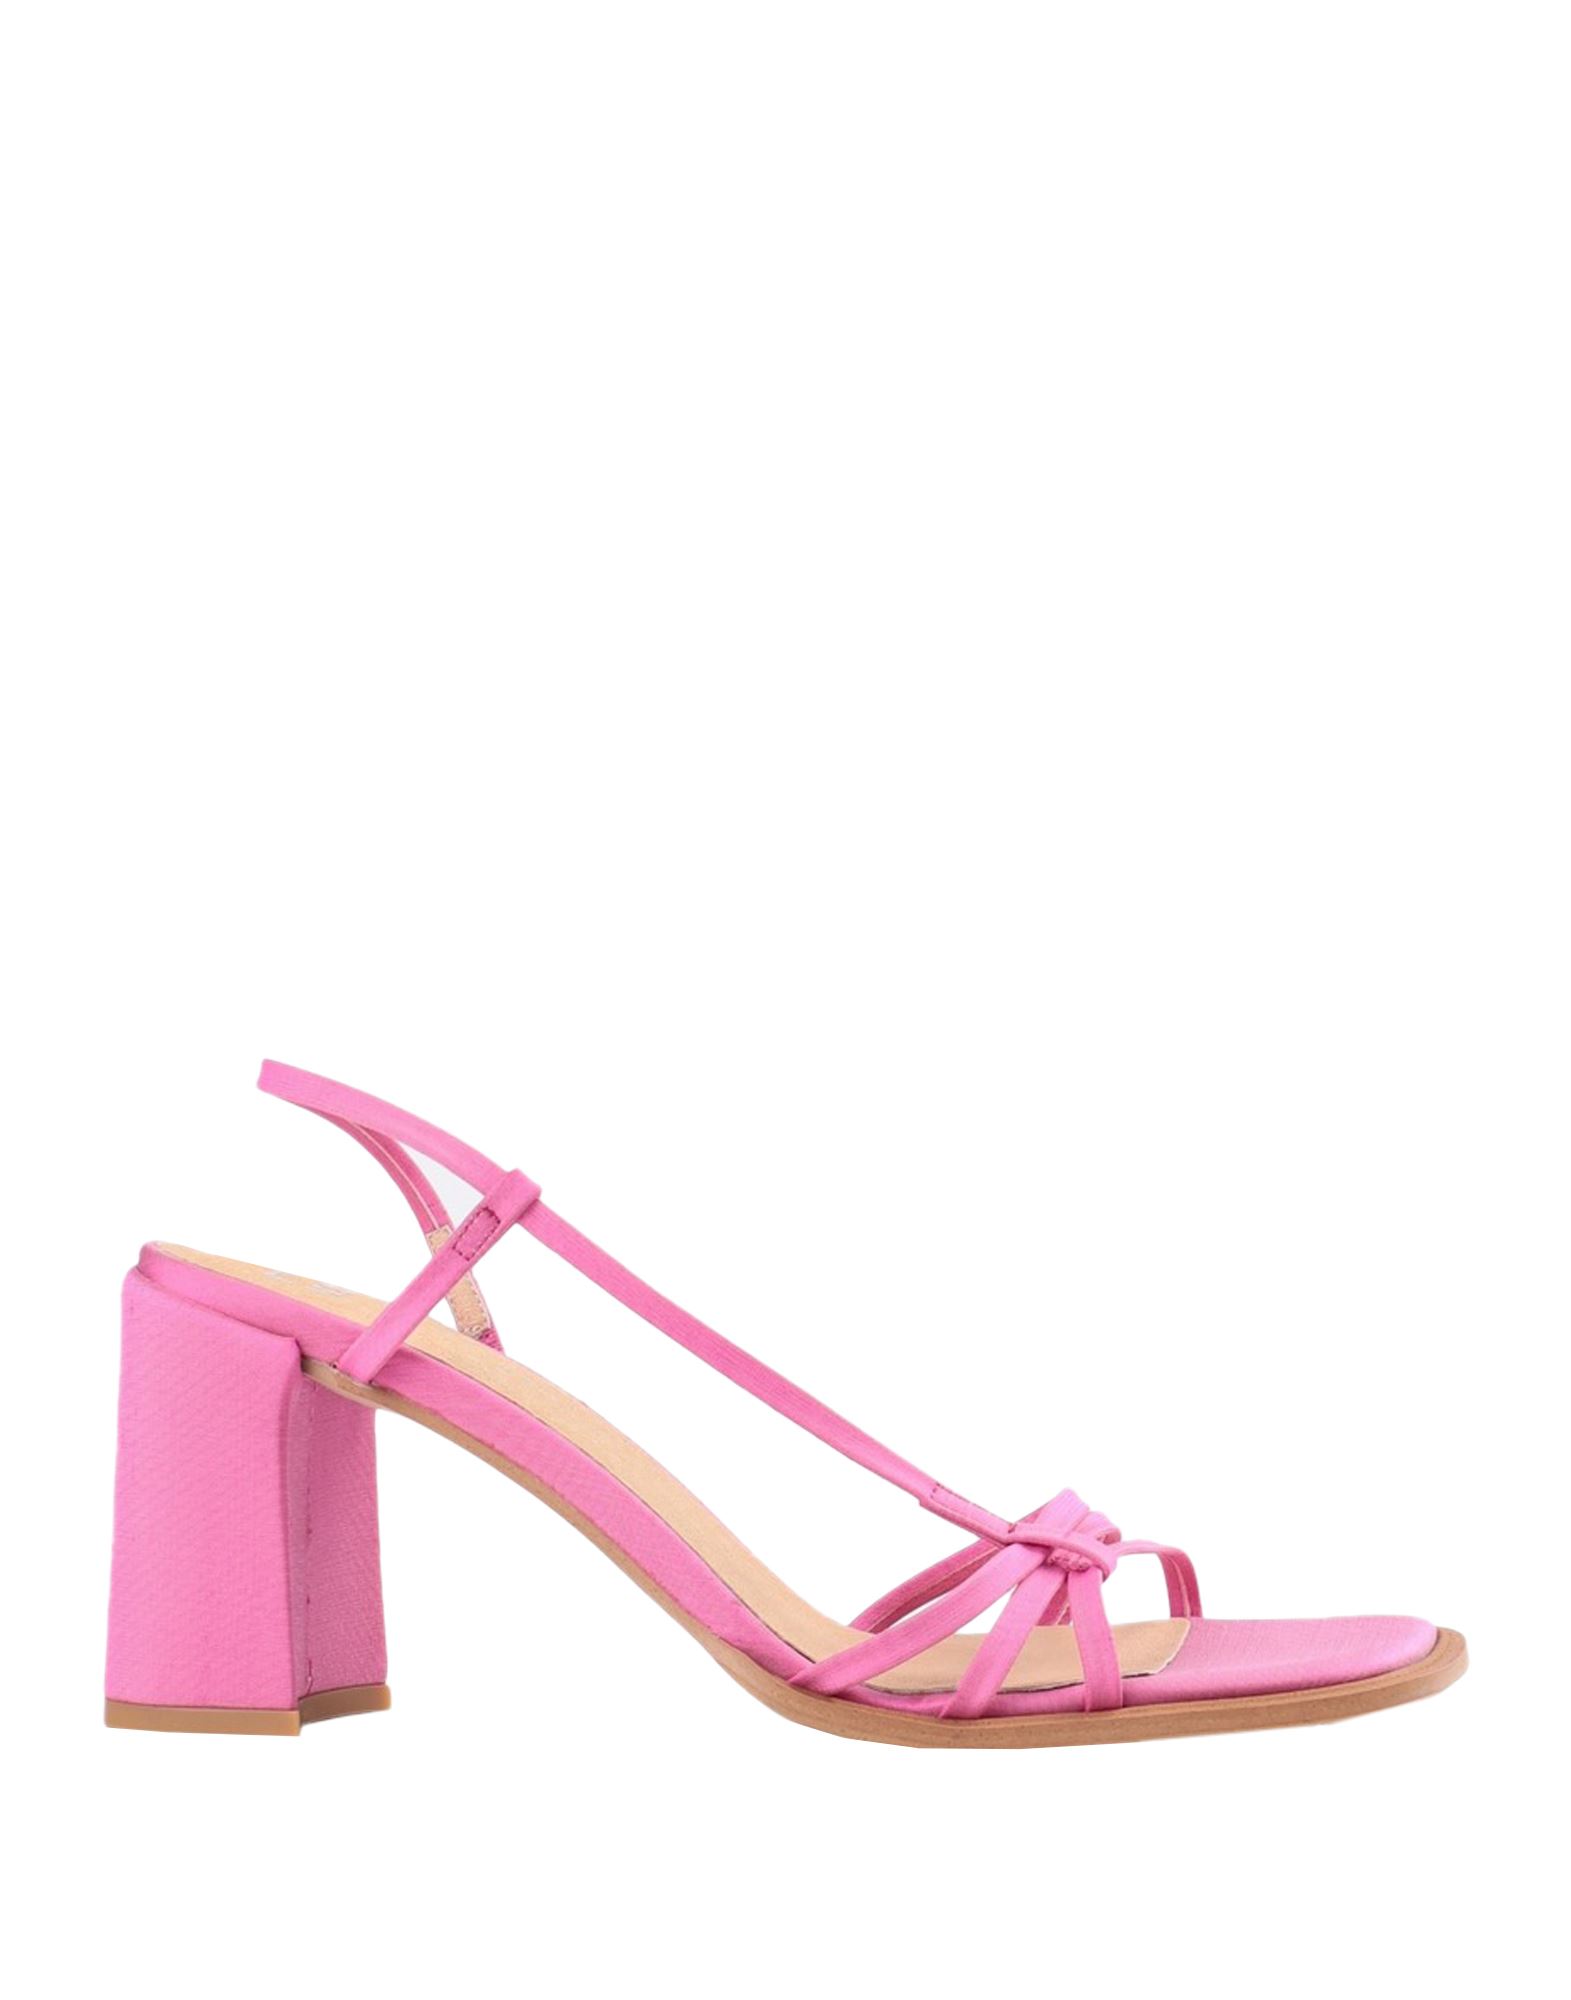 E8 By Miista Sandals In Pink